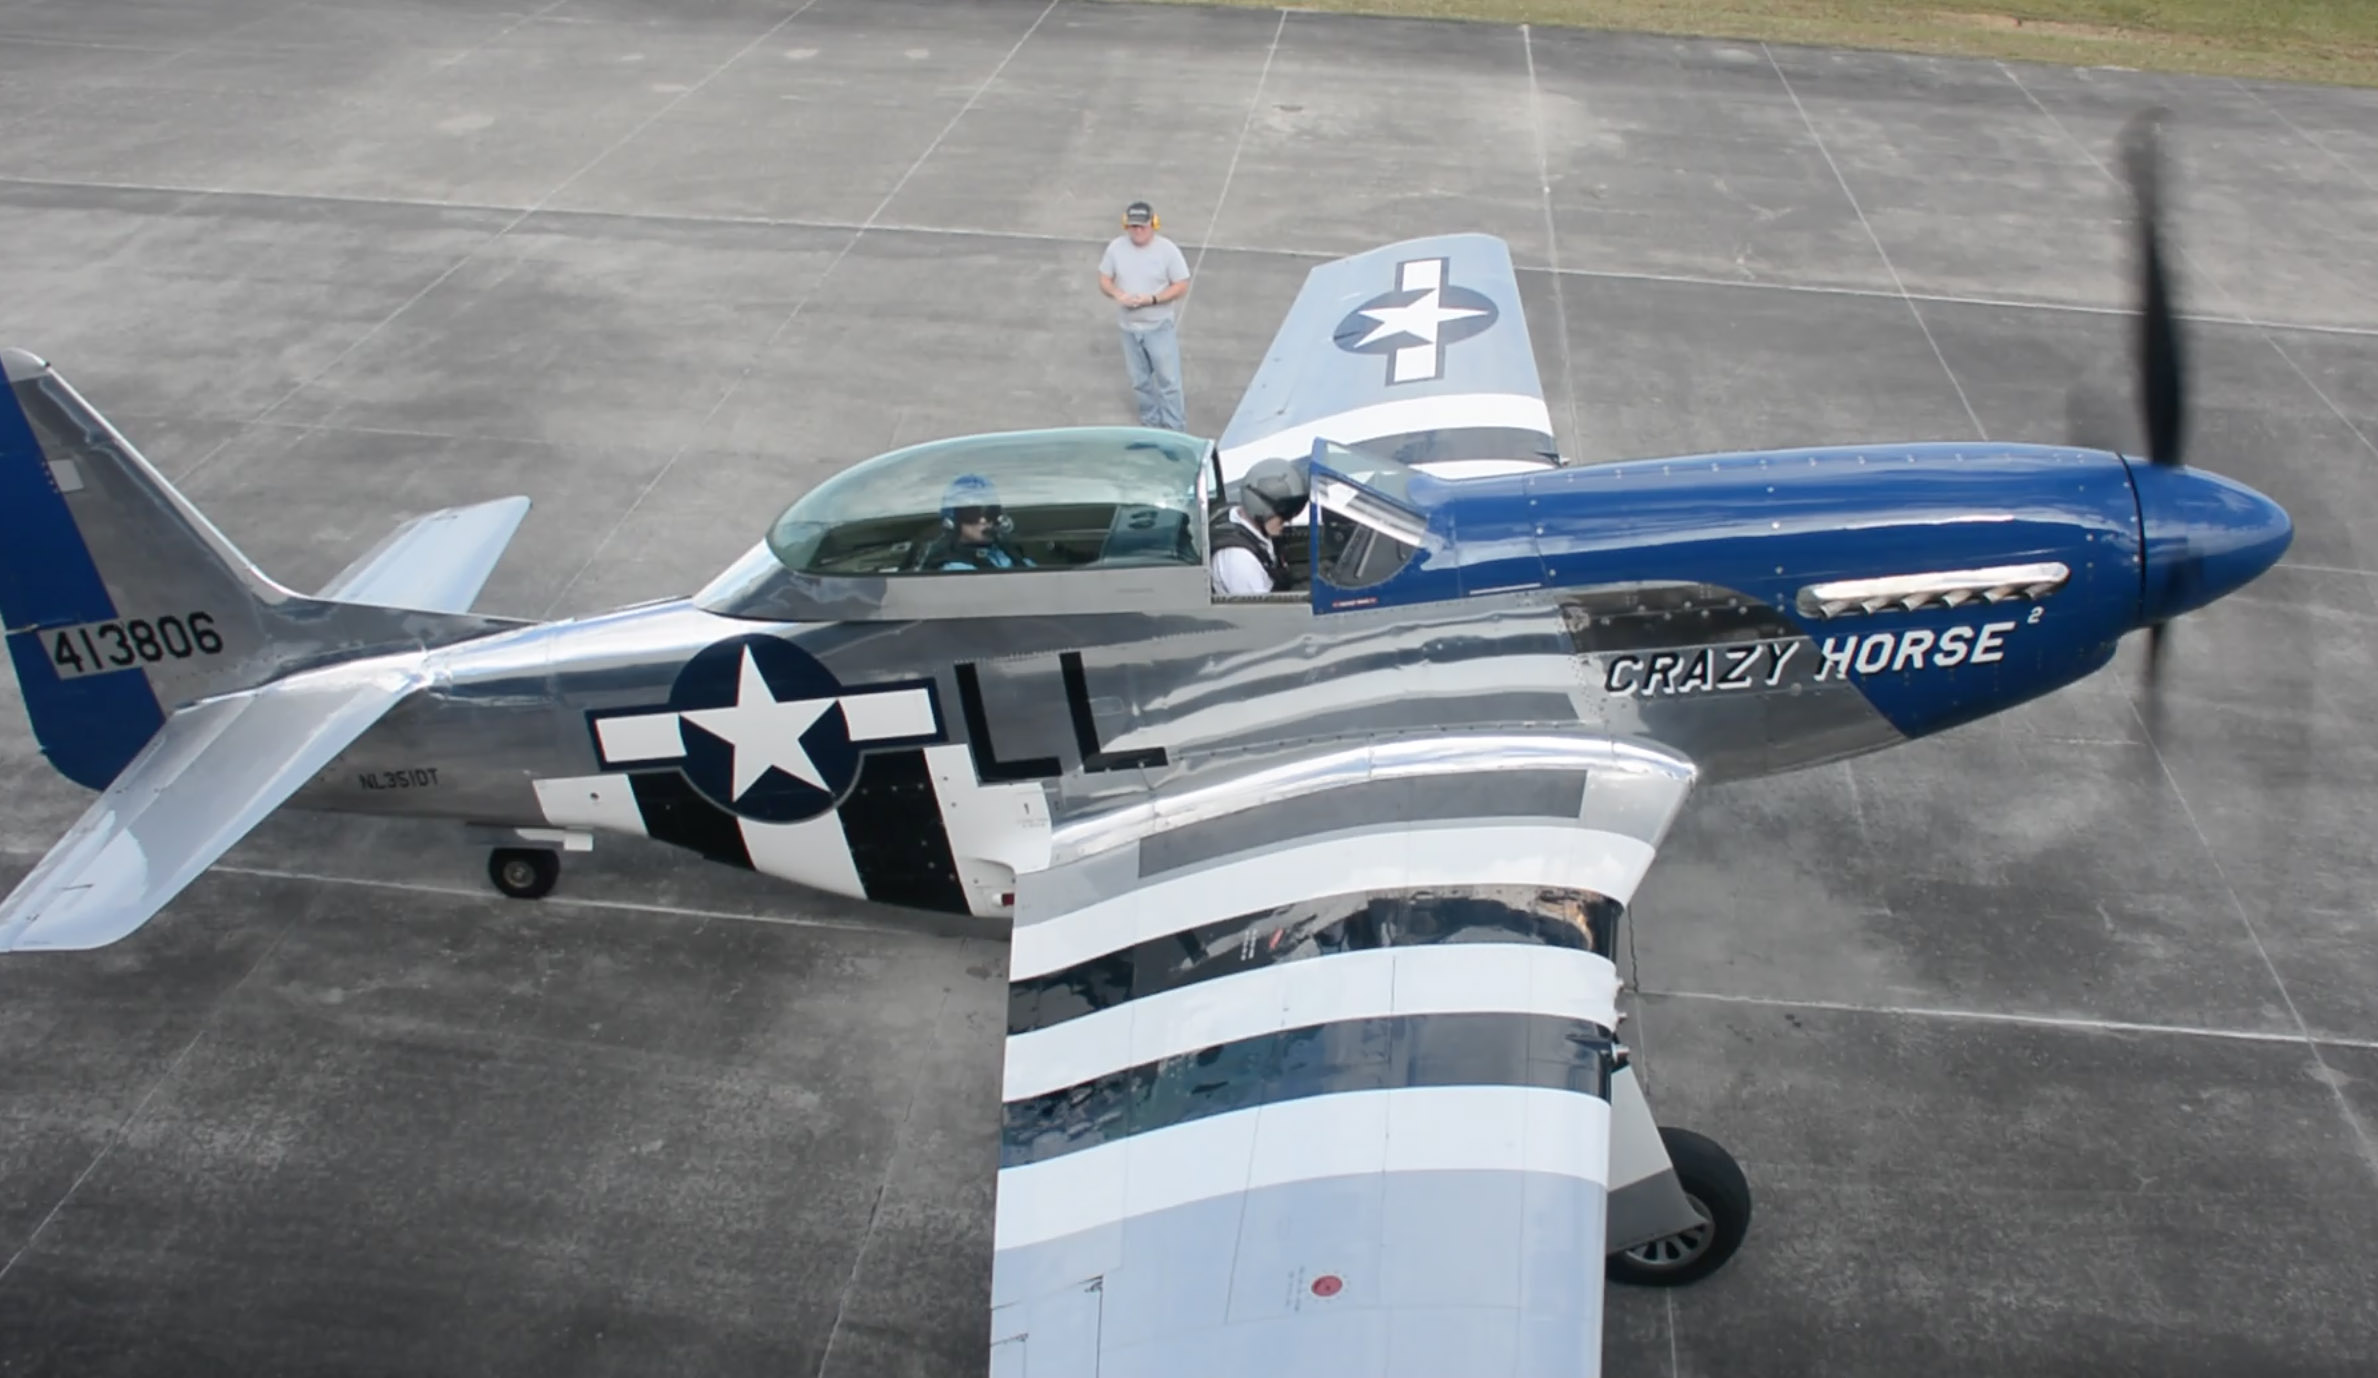 Flying the Mustang P-51 “Crazy Horse” in Florida